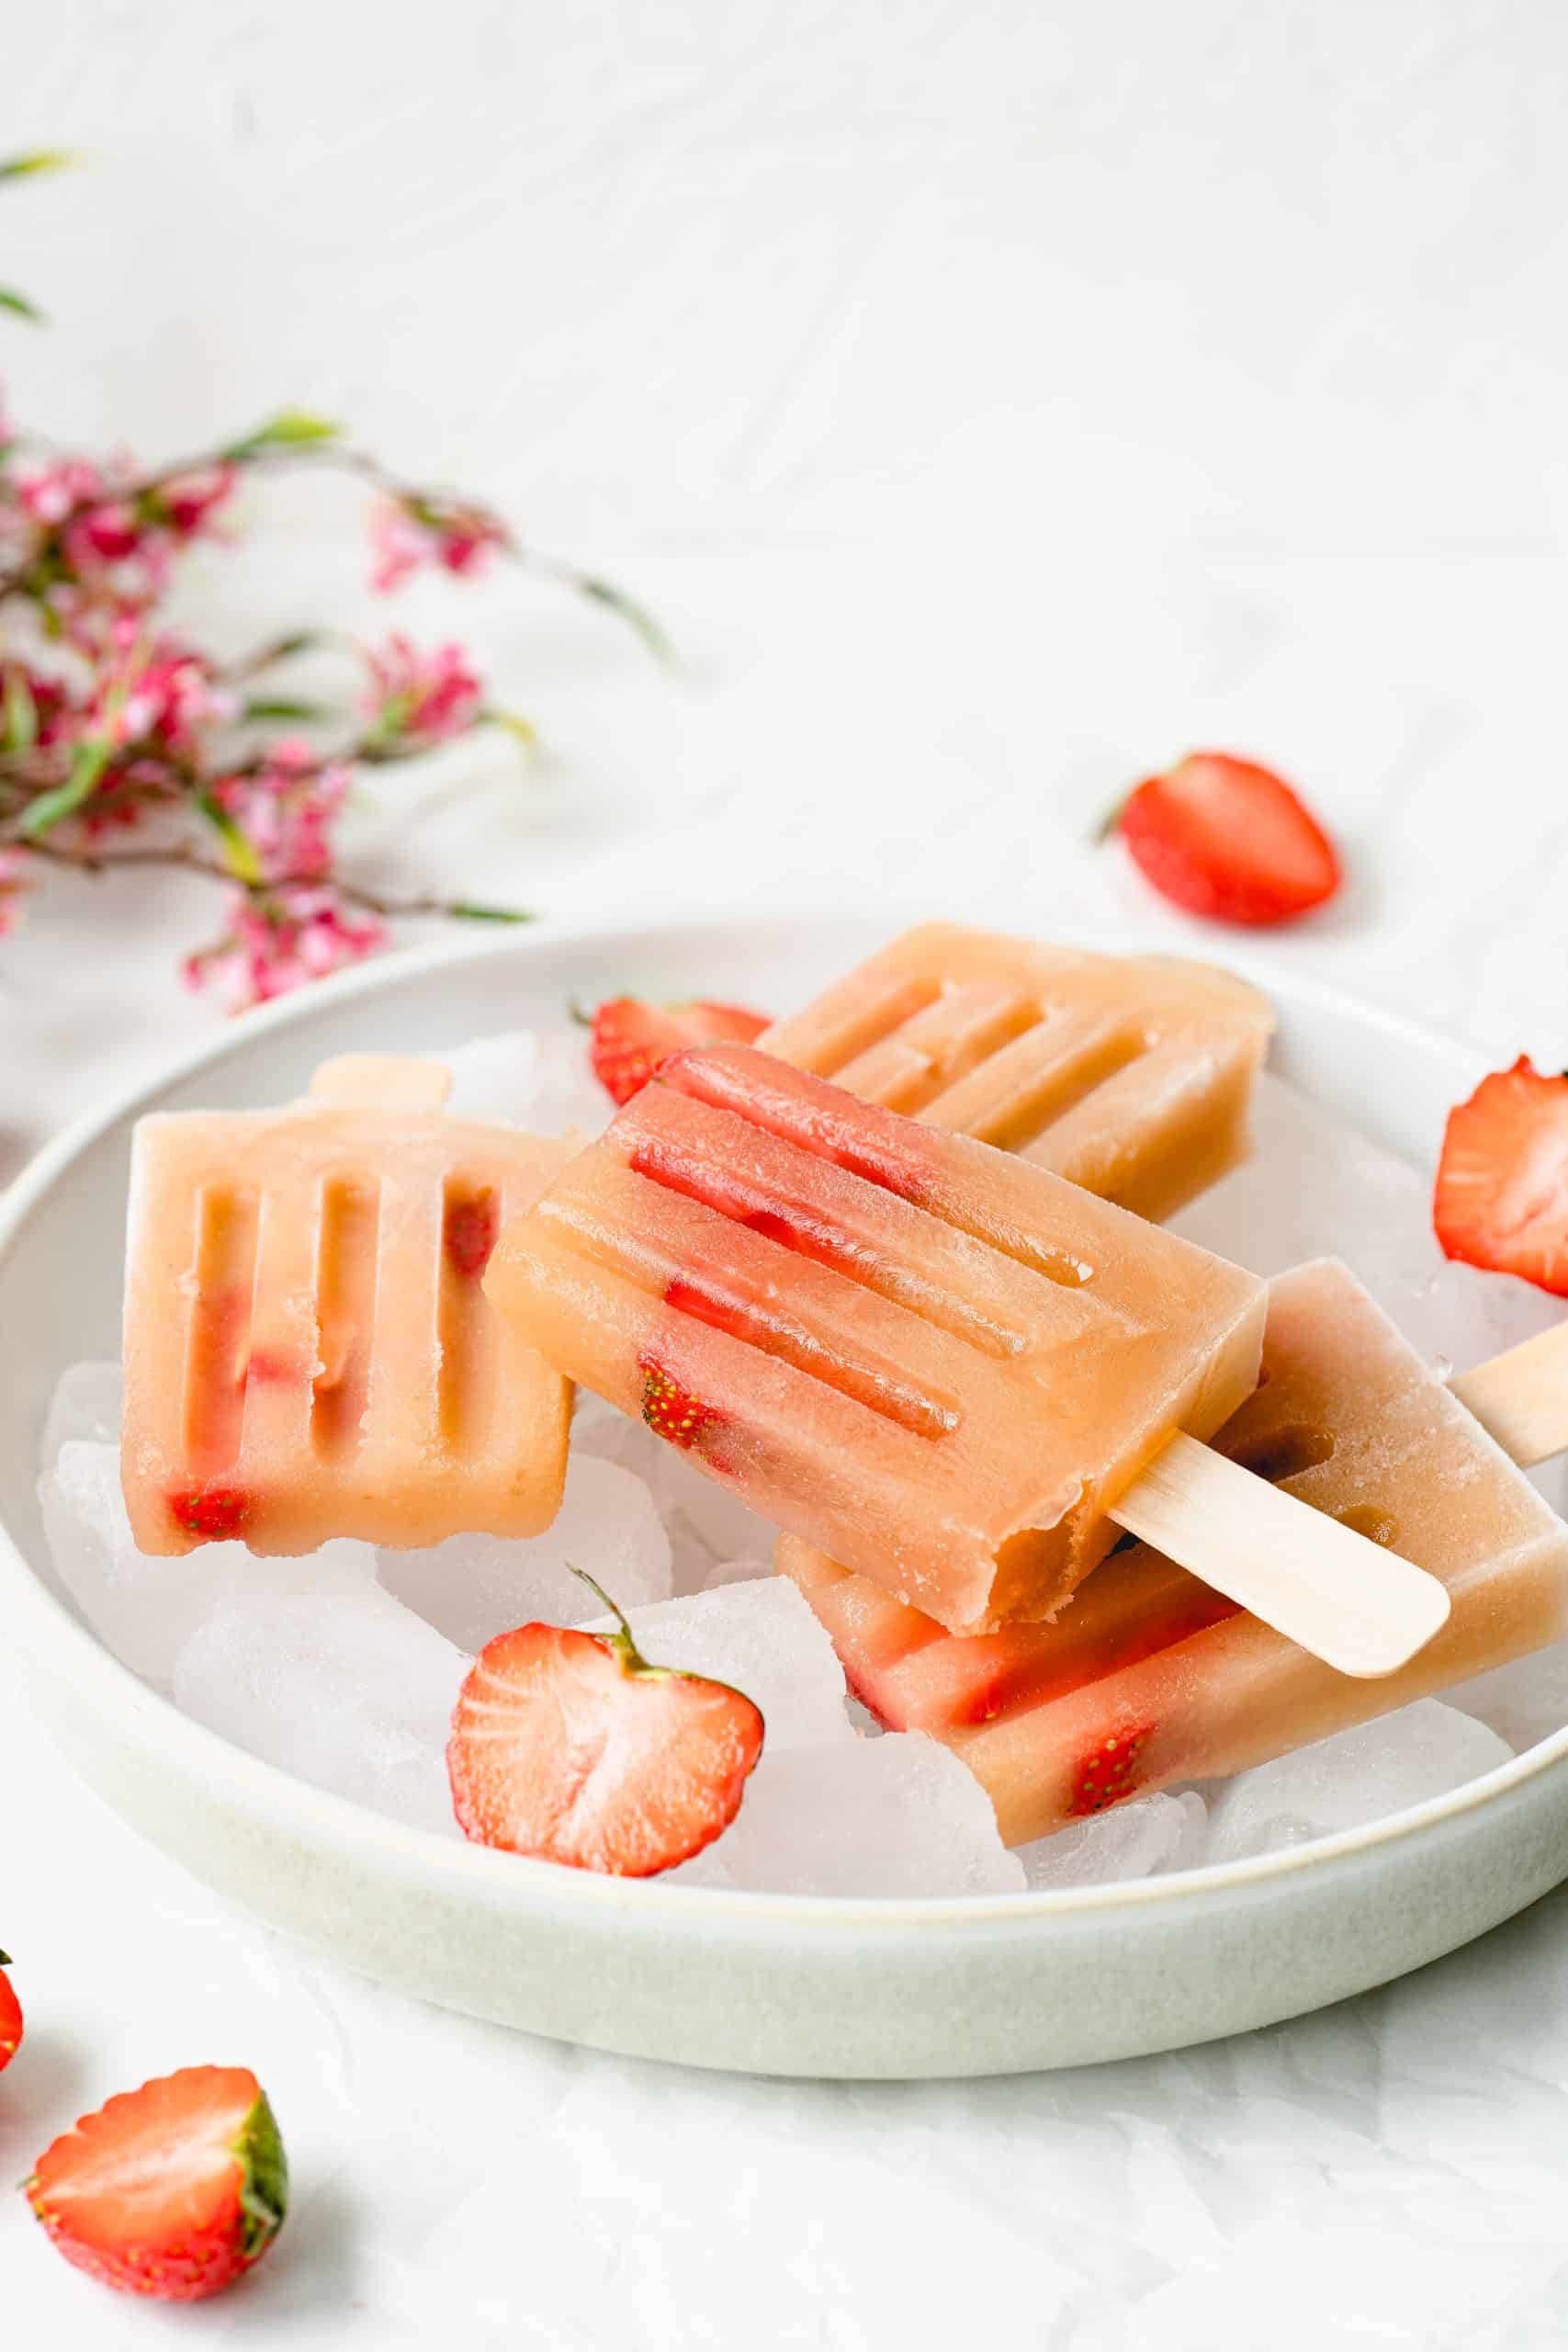 Applesauce Popsicles with Strawberries